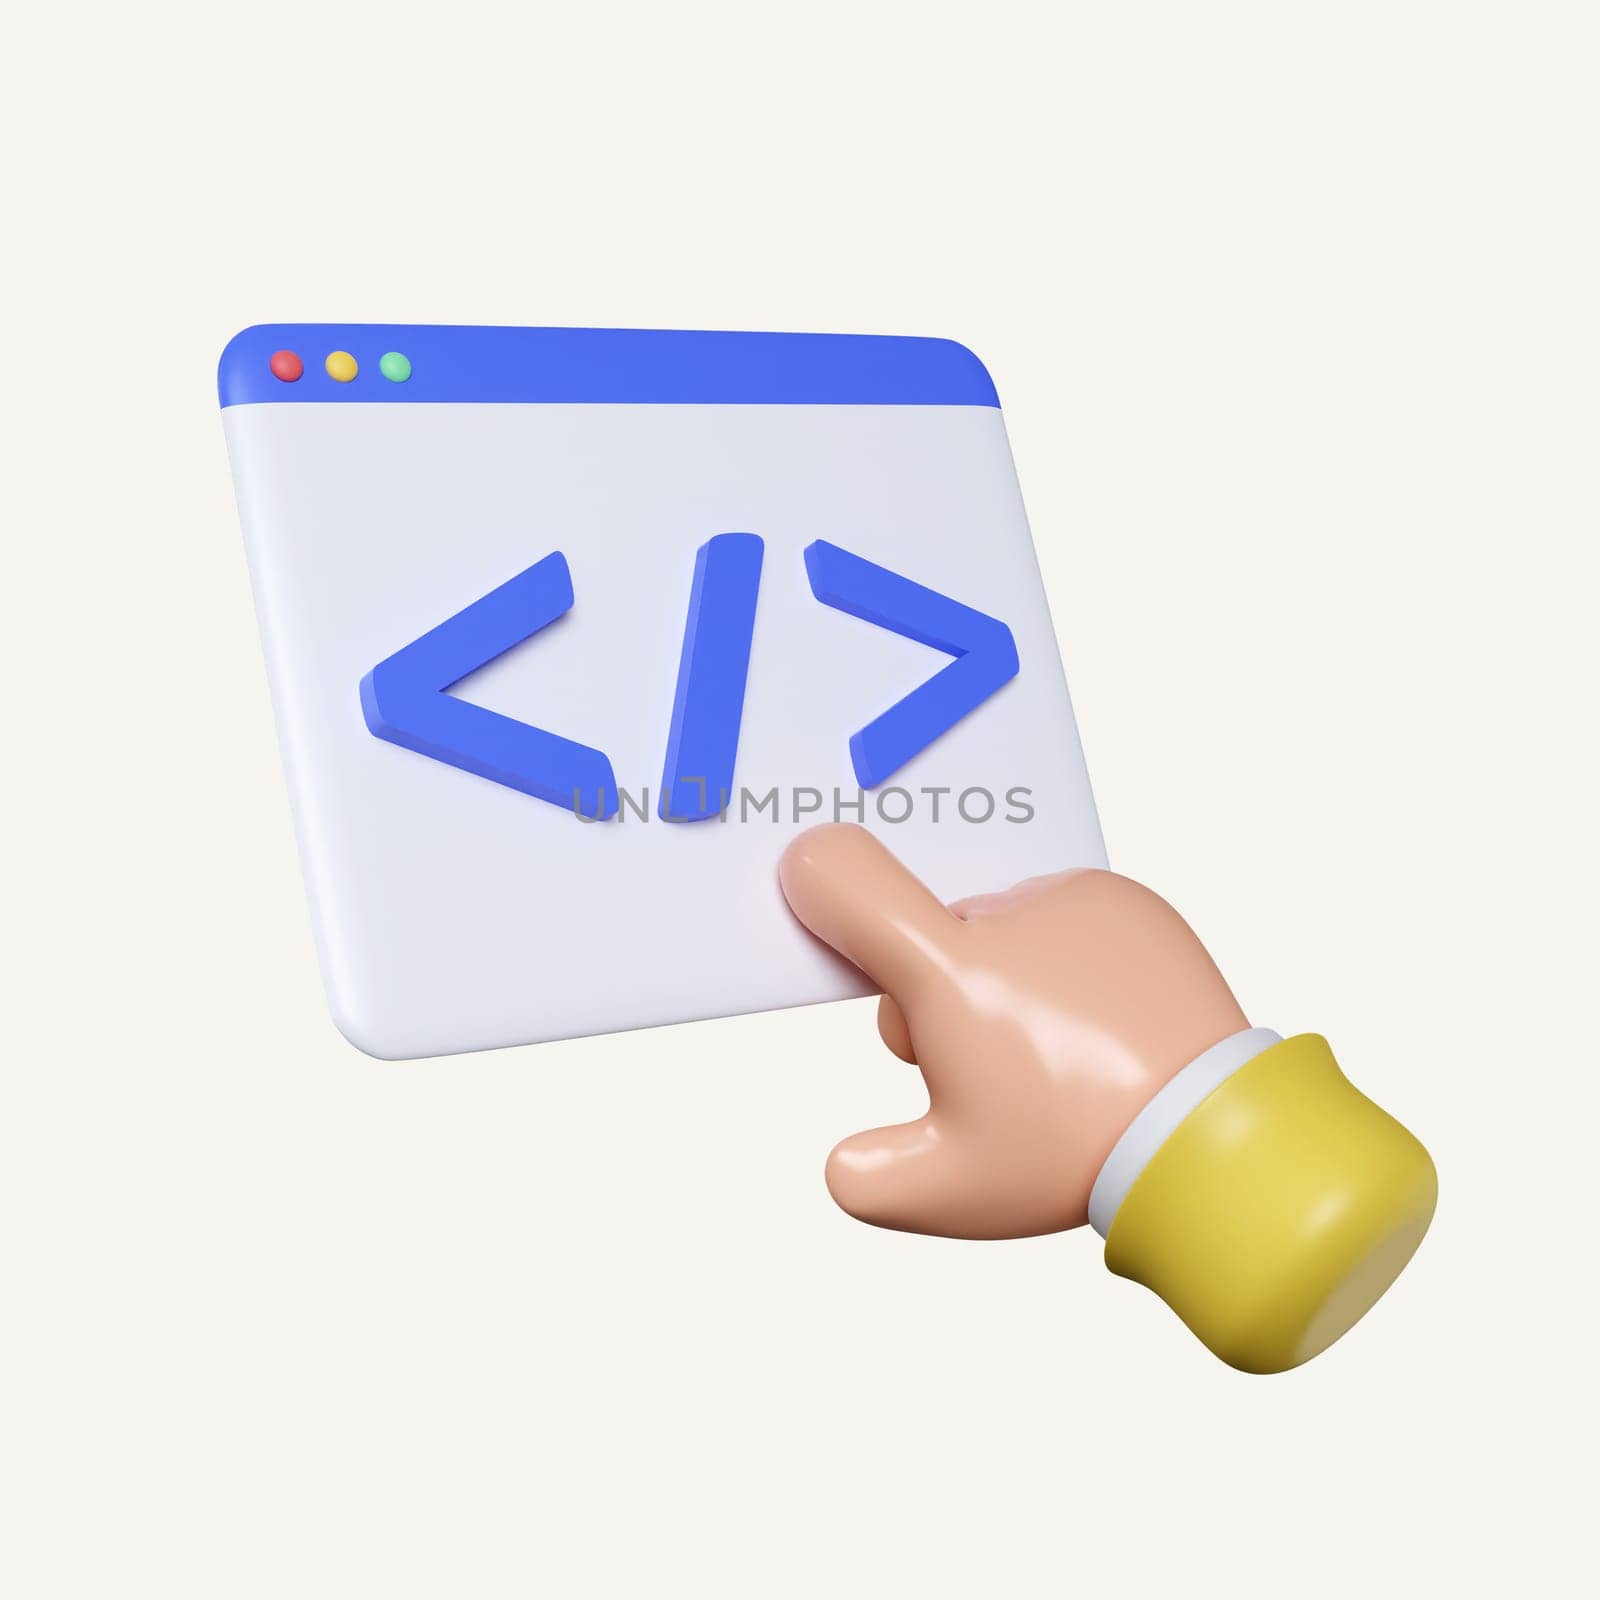 Programming code product development. Computer programming. Developer coding. Web Development concept. icon isolated on white background. 3d rendering illustration. Clipping path..